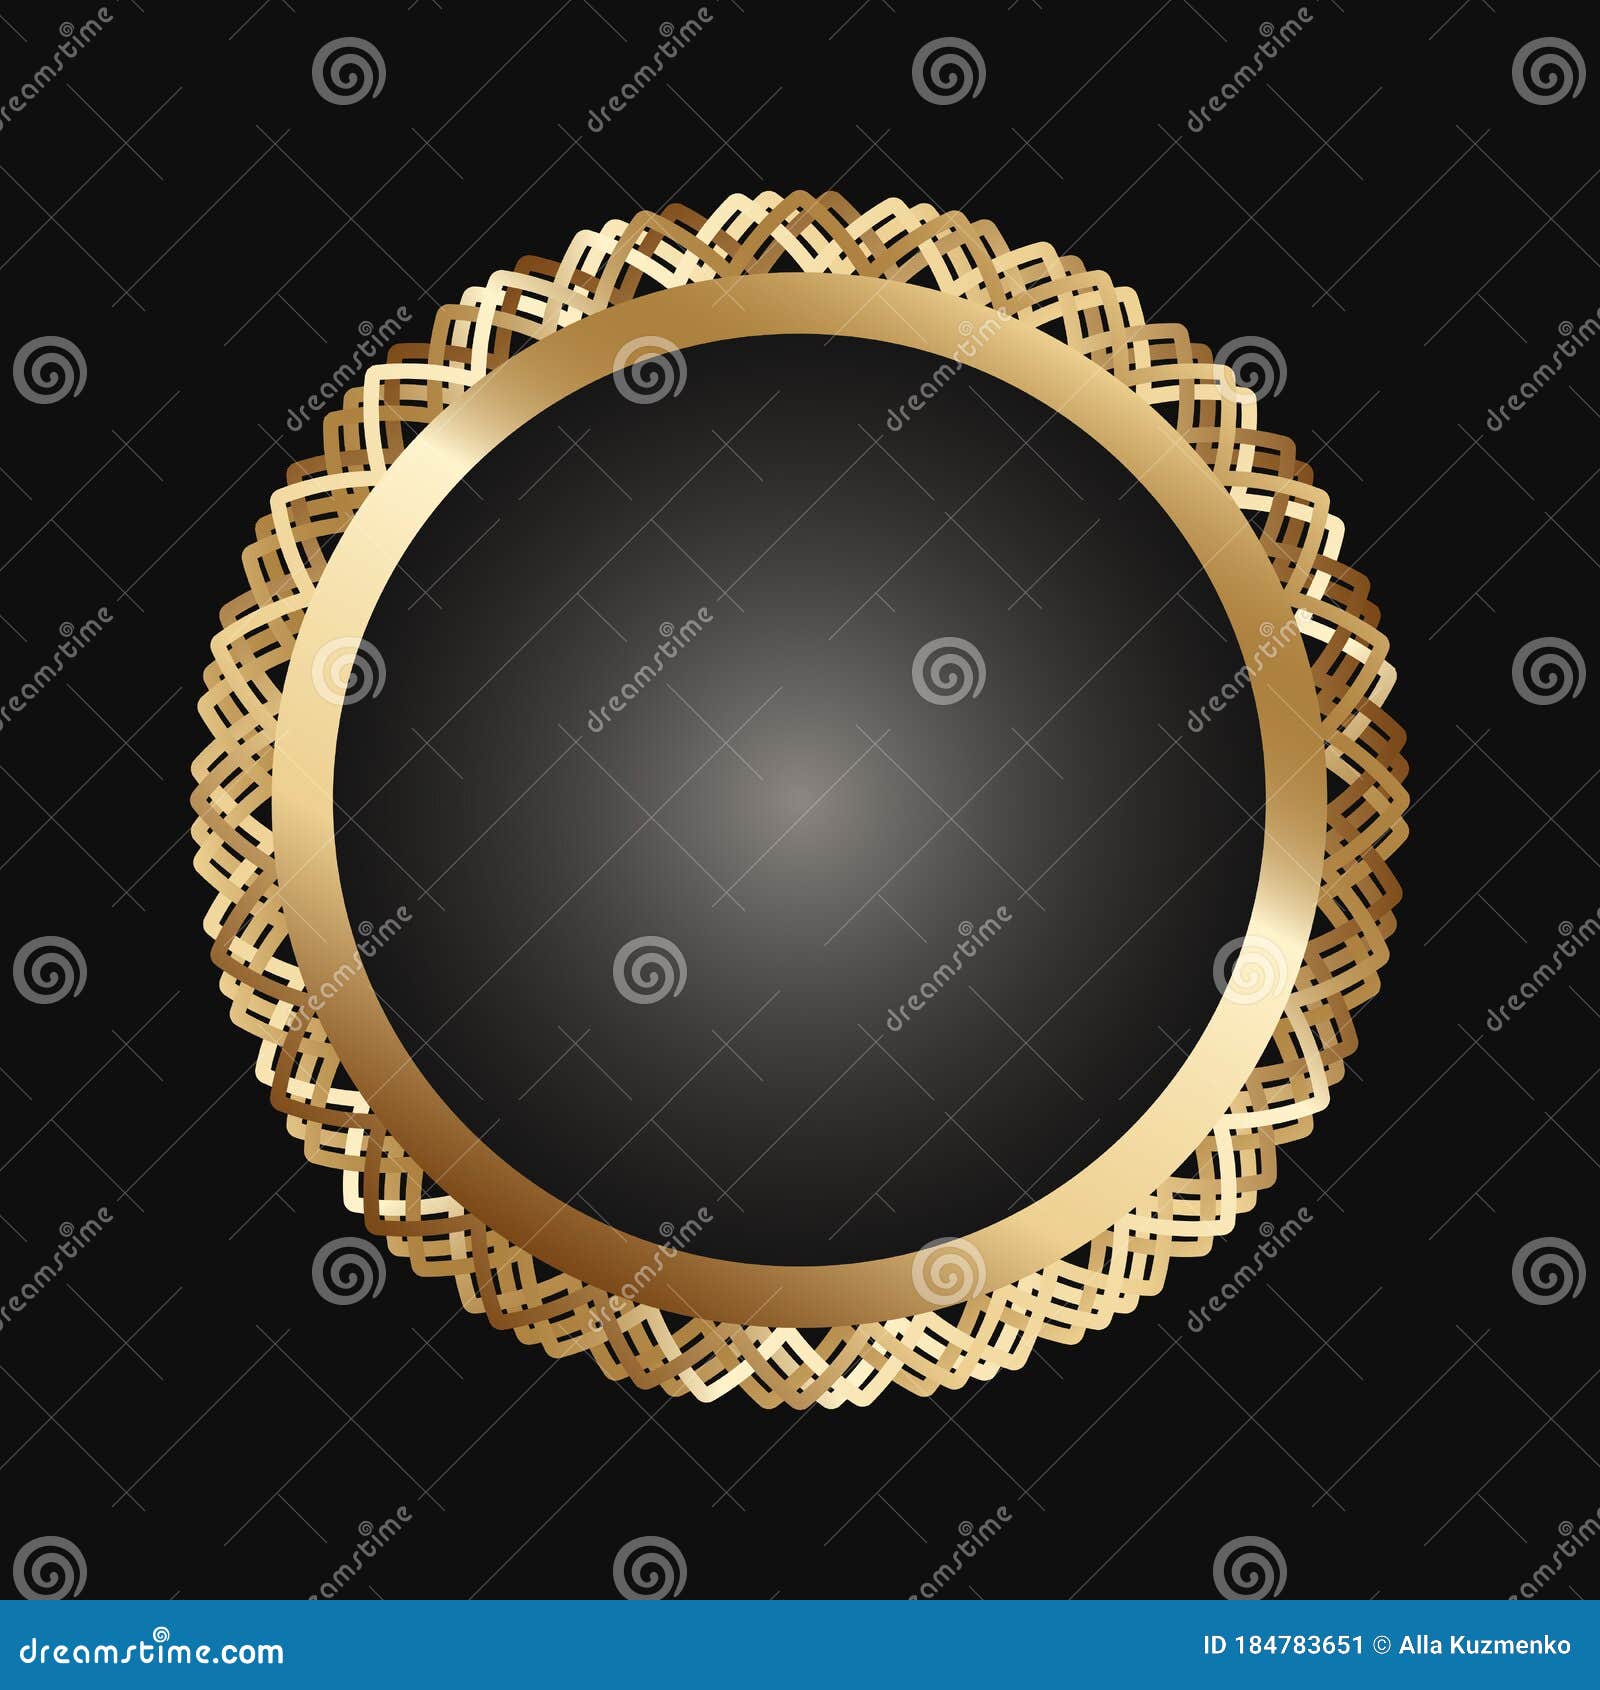 Golden Round Frame with Floral Ornament on Black Background. Art Deco.  Luxury Gold Mandala, Hand Draw Design Stock Vector - Illustration of  decorative, abstract: 184783651